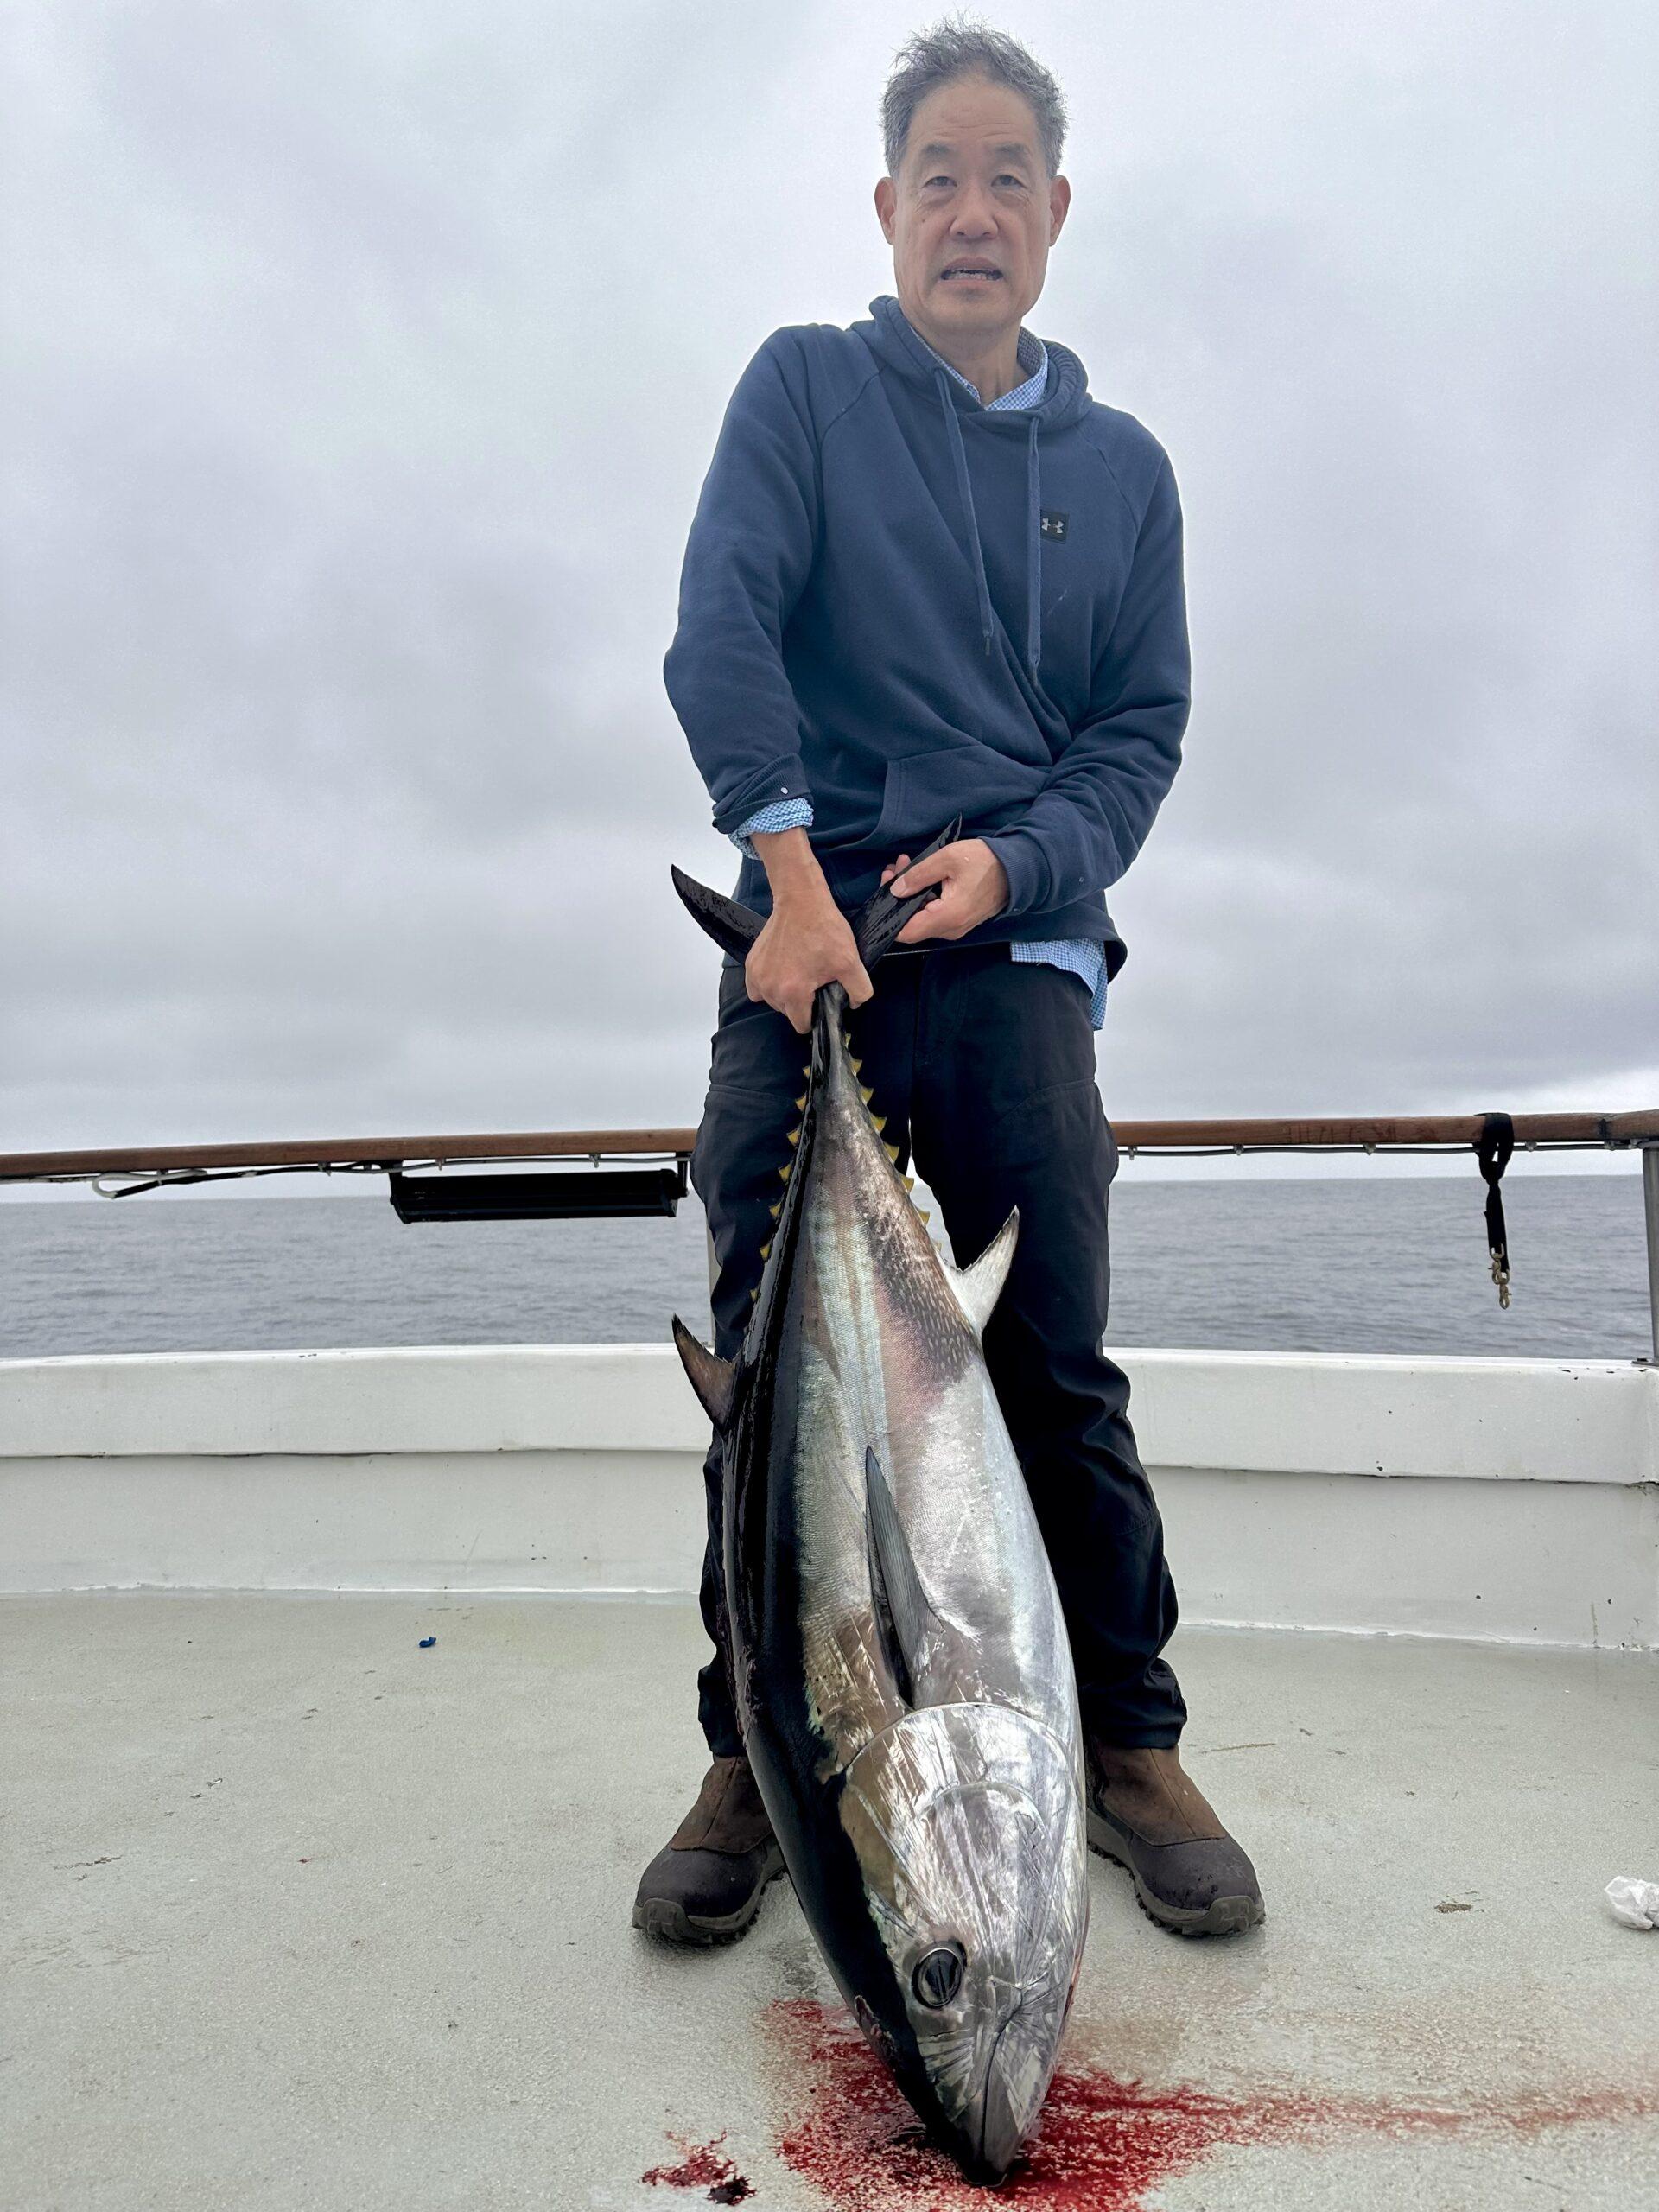 Angler caught a bluefin in the Pacific Ocean.